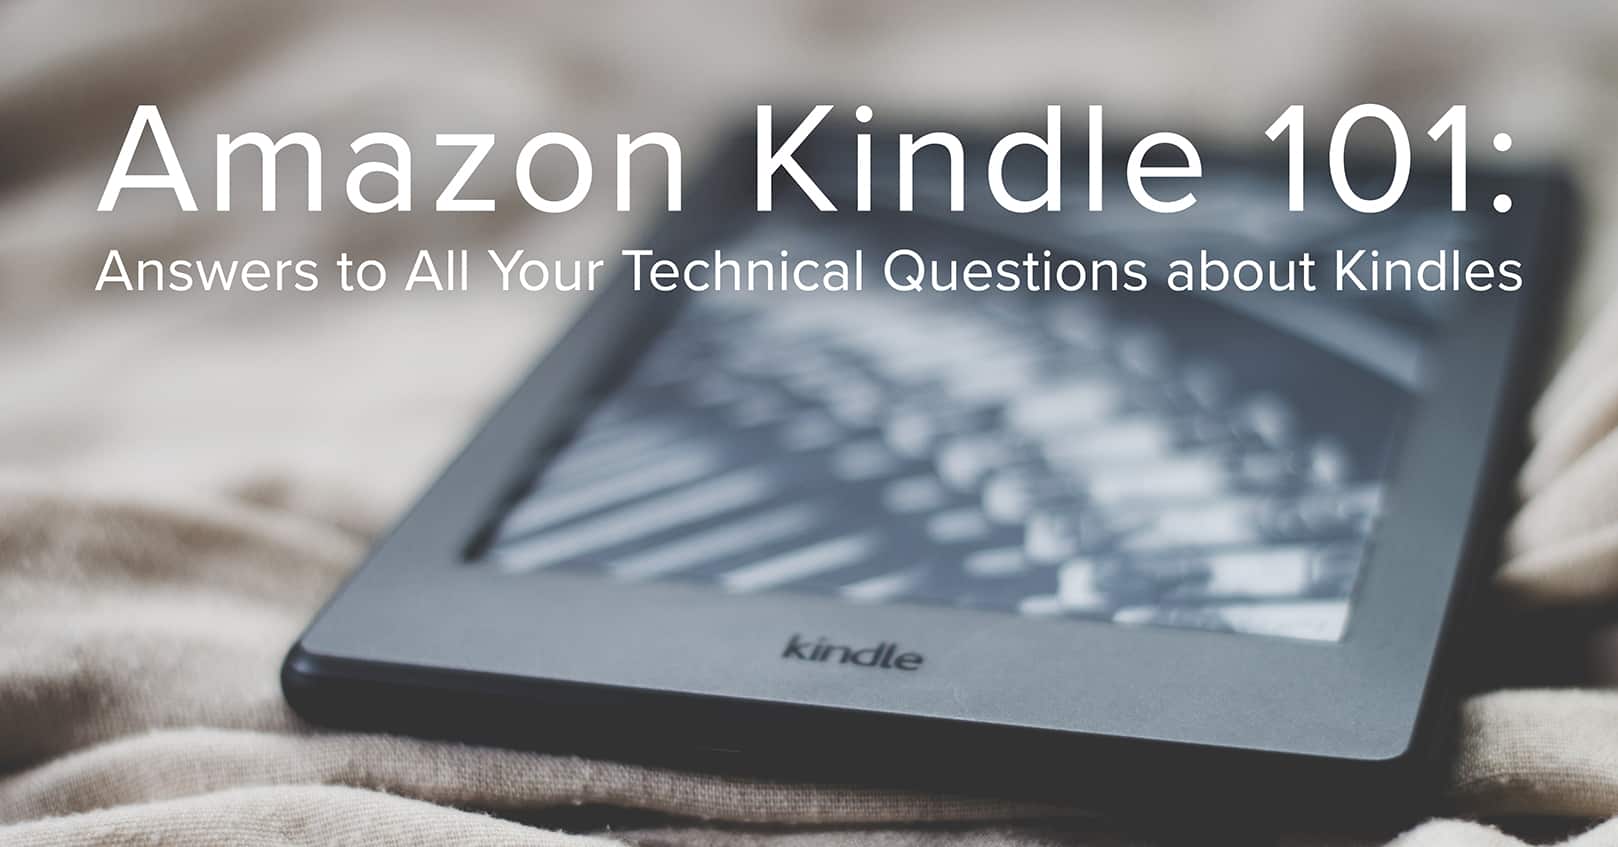 Amazon Kindle 101: Answers to All Your Technical Questions about Kindles